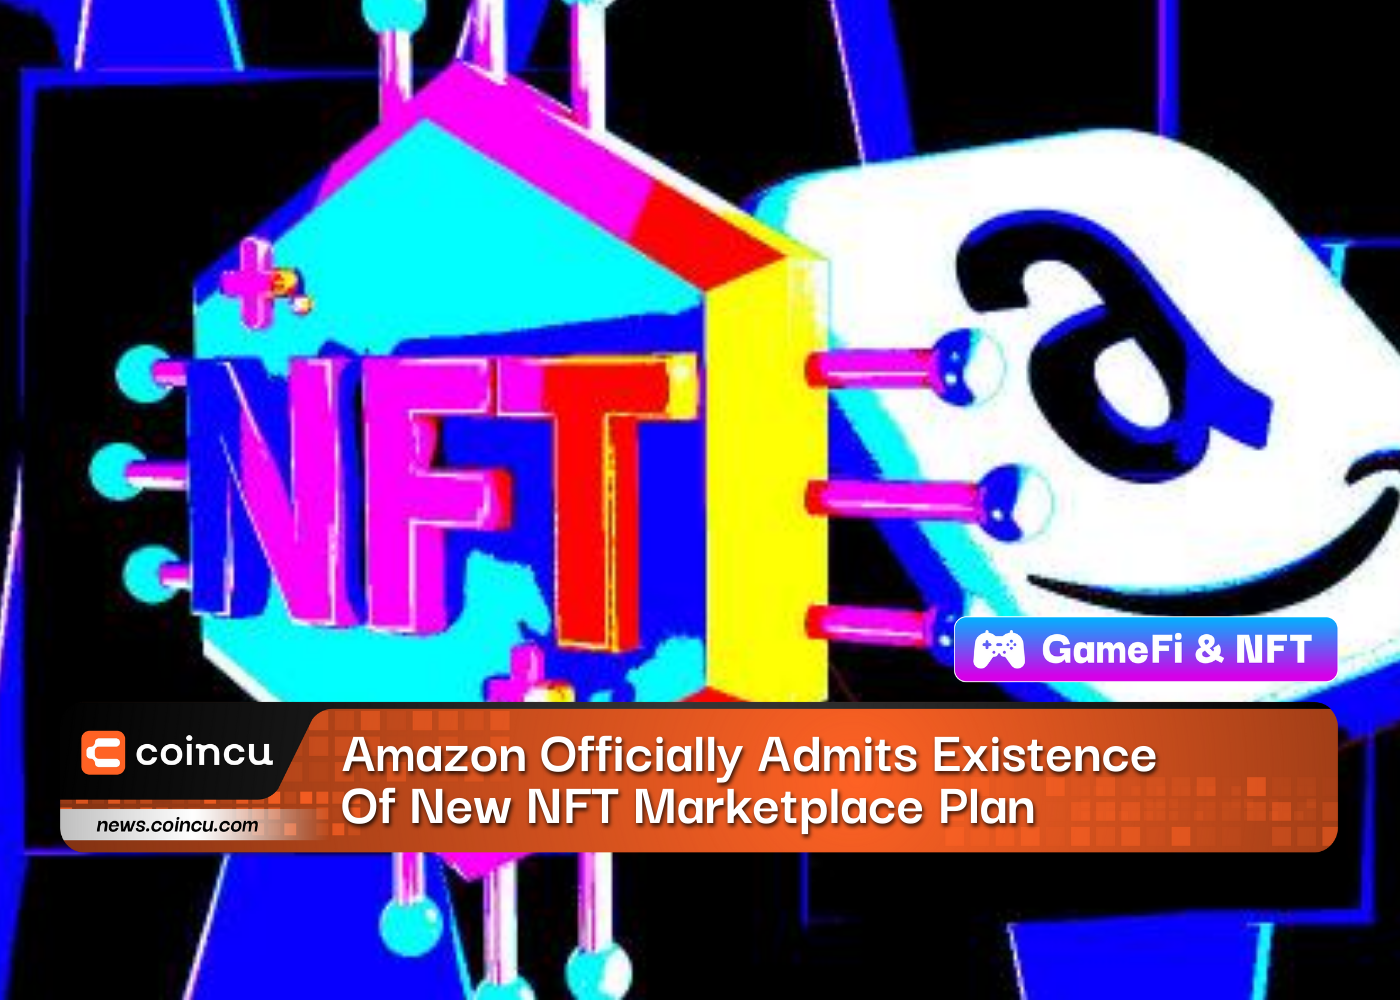 Amazon Officially Admits Existence Of New NFT Marketplace Plan